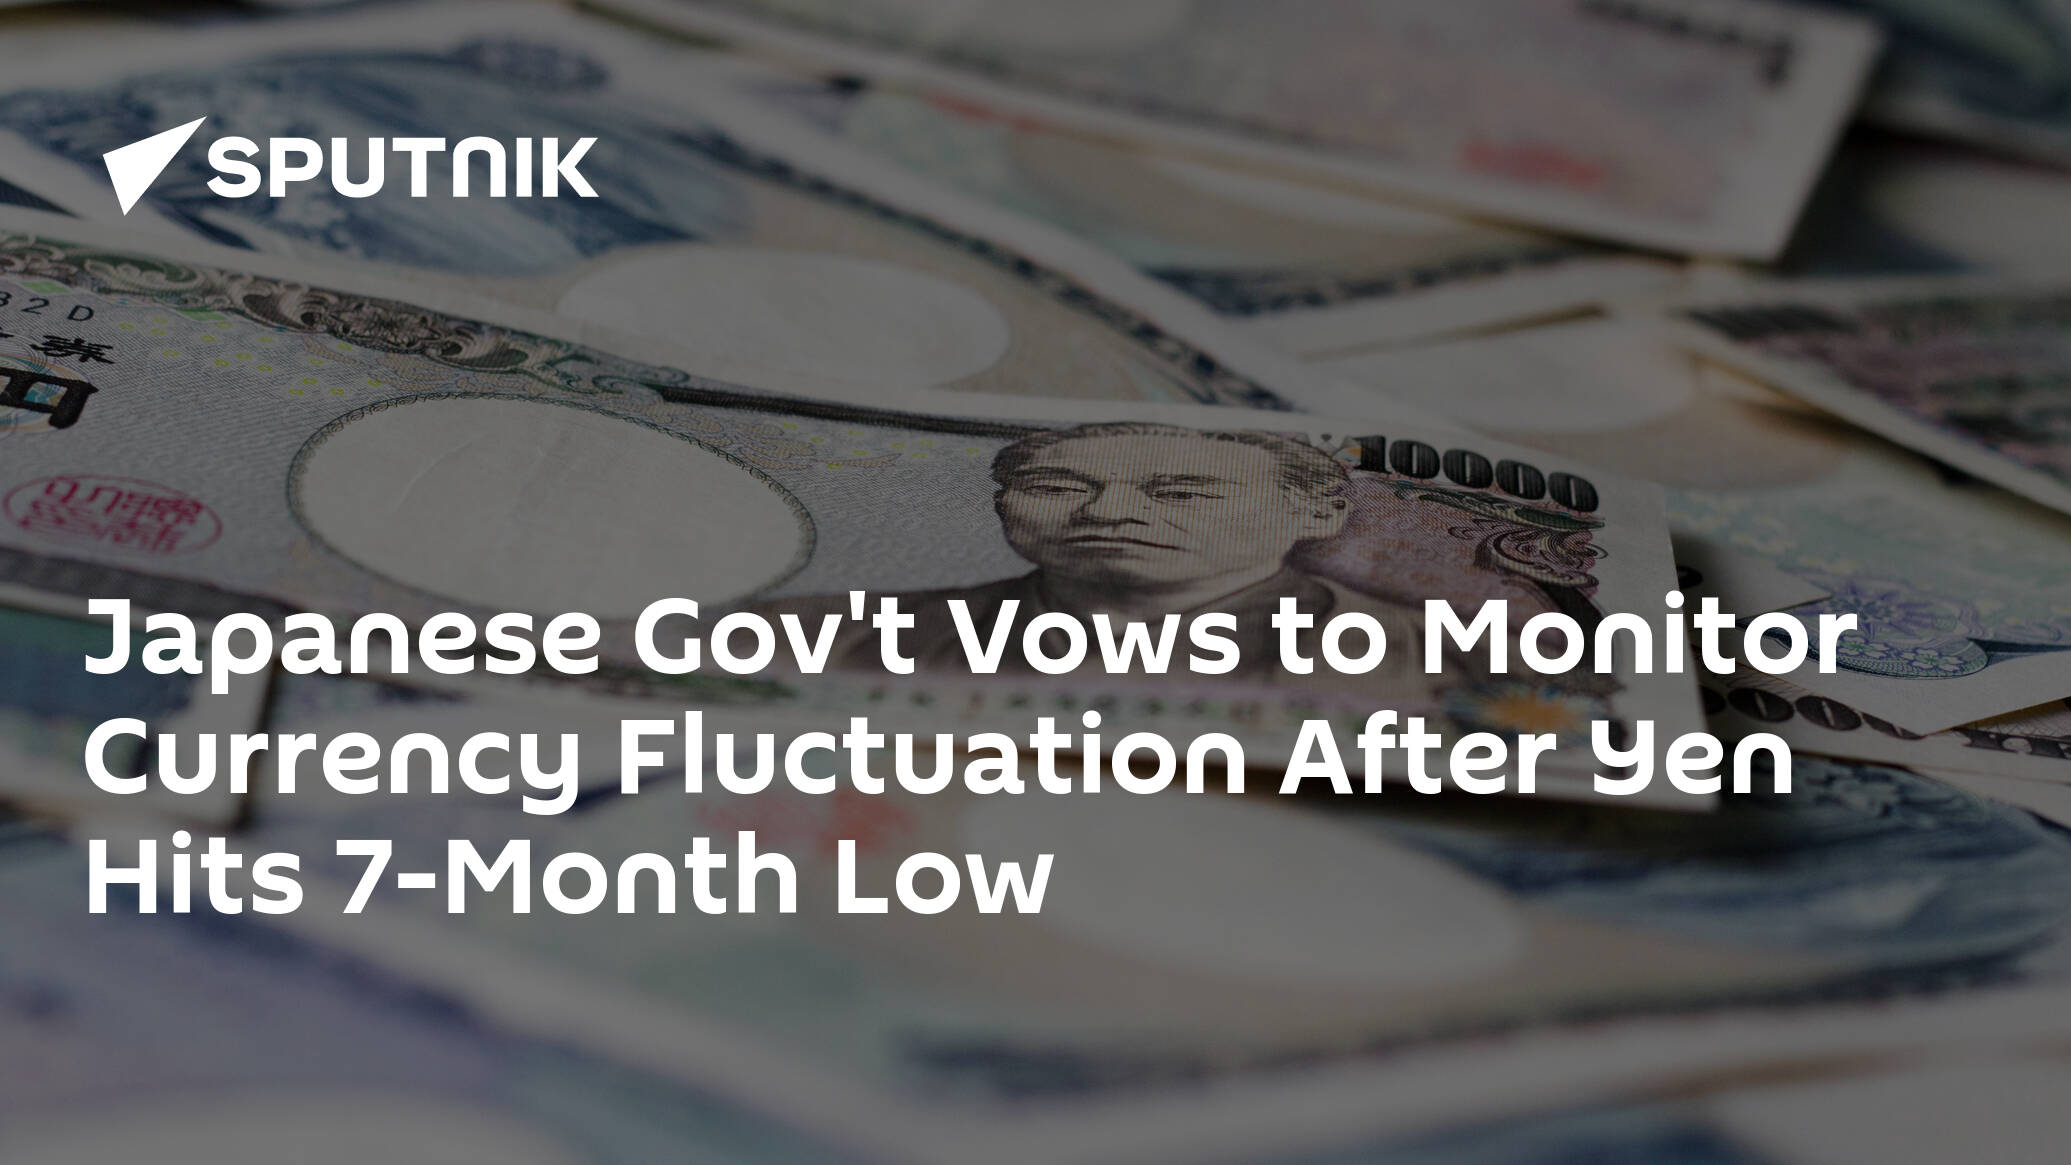 Japanese Gov't Vows to Monitor Currency Fluctuation After Yen Hits 7-Month Low